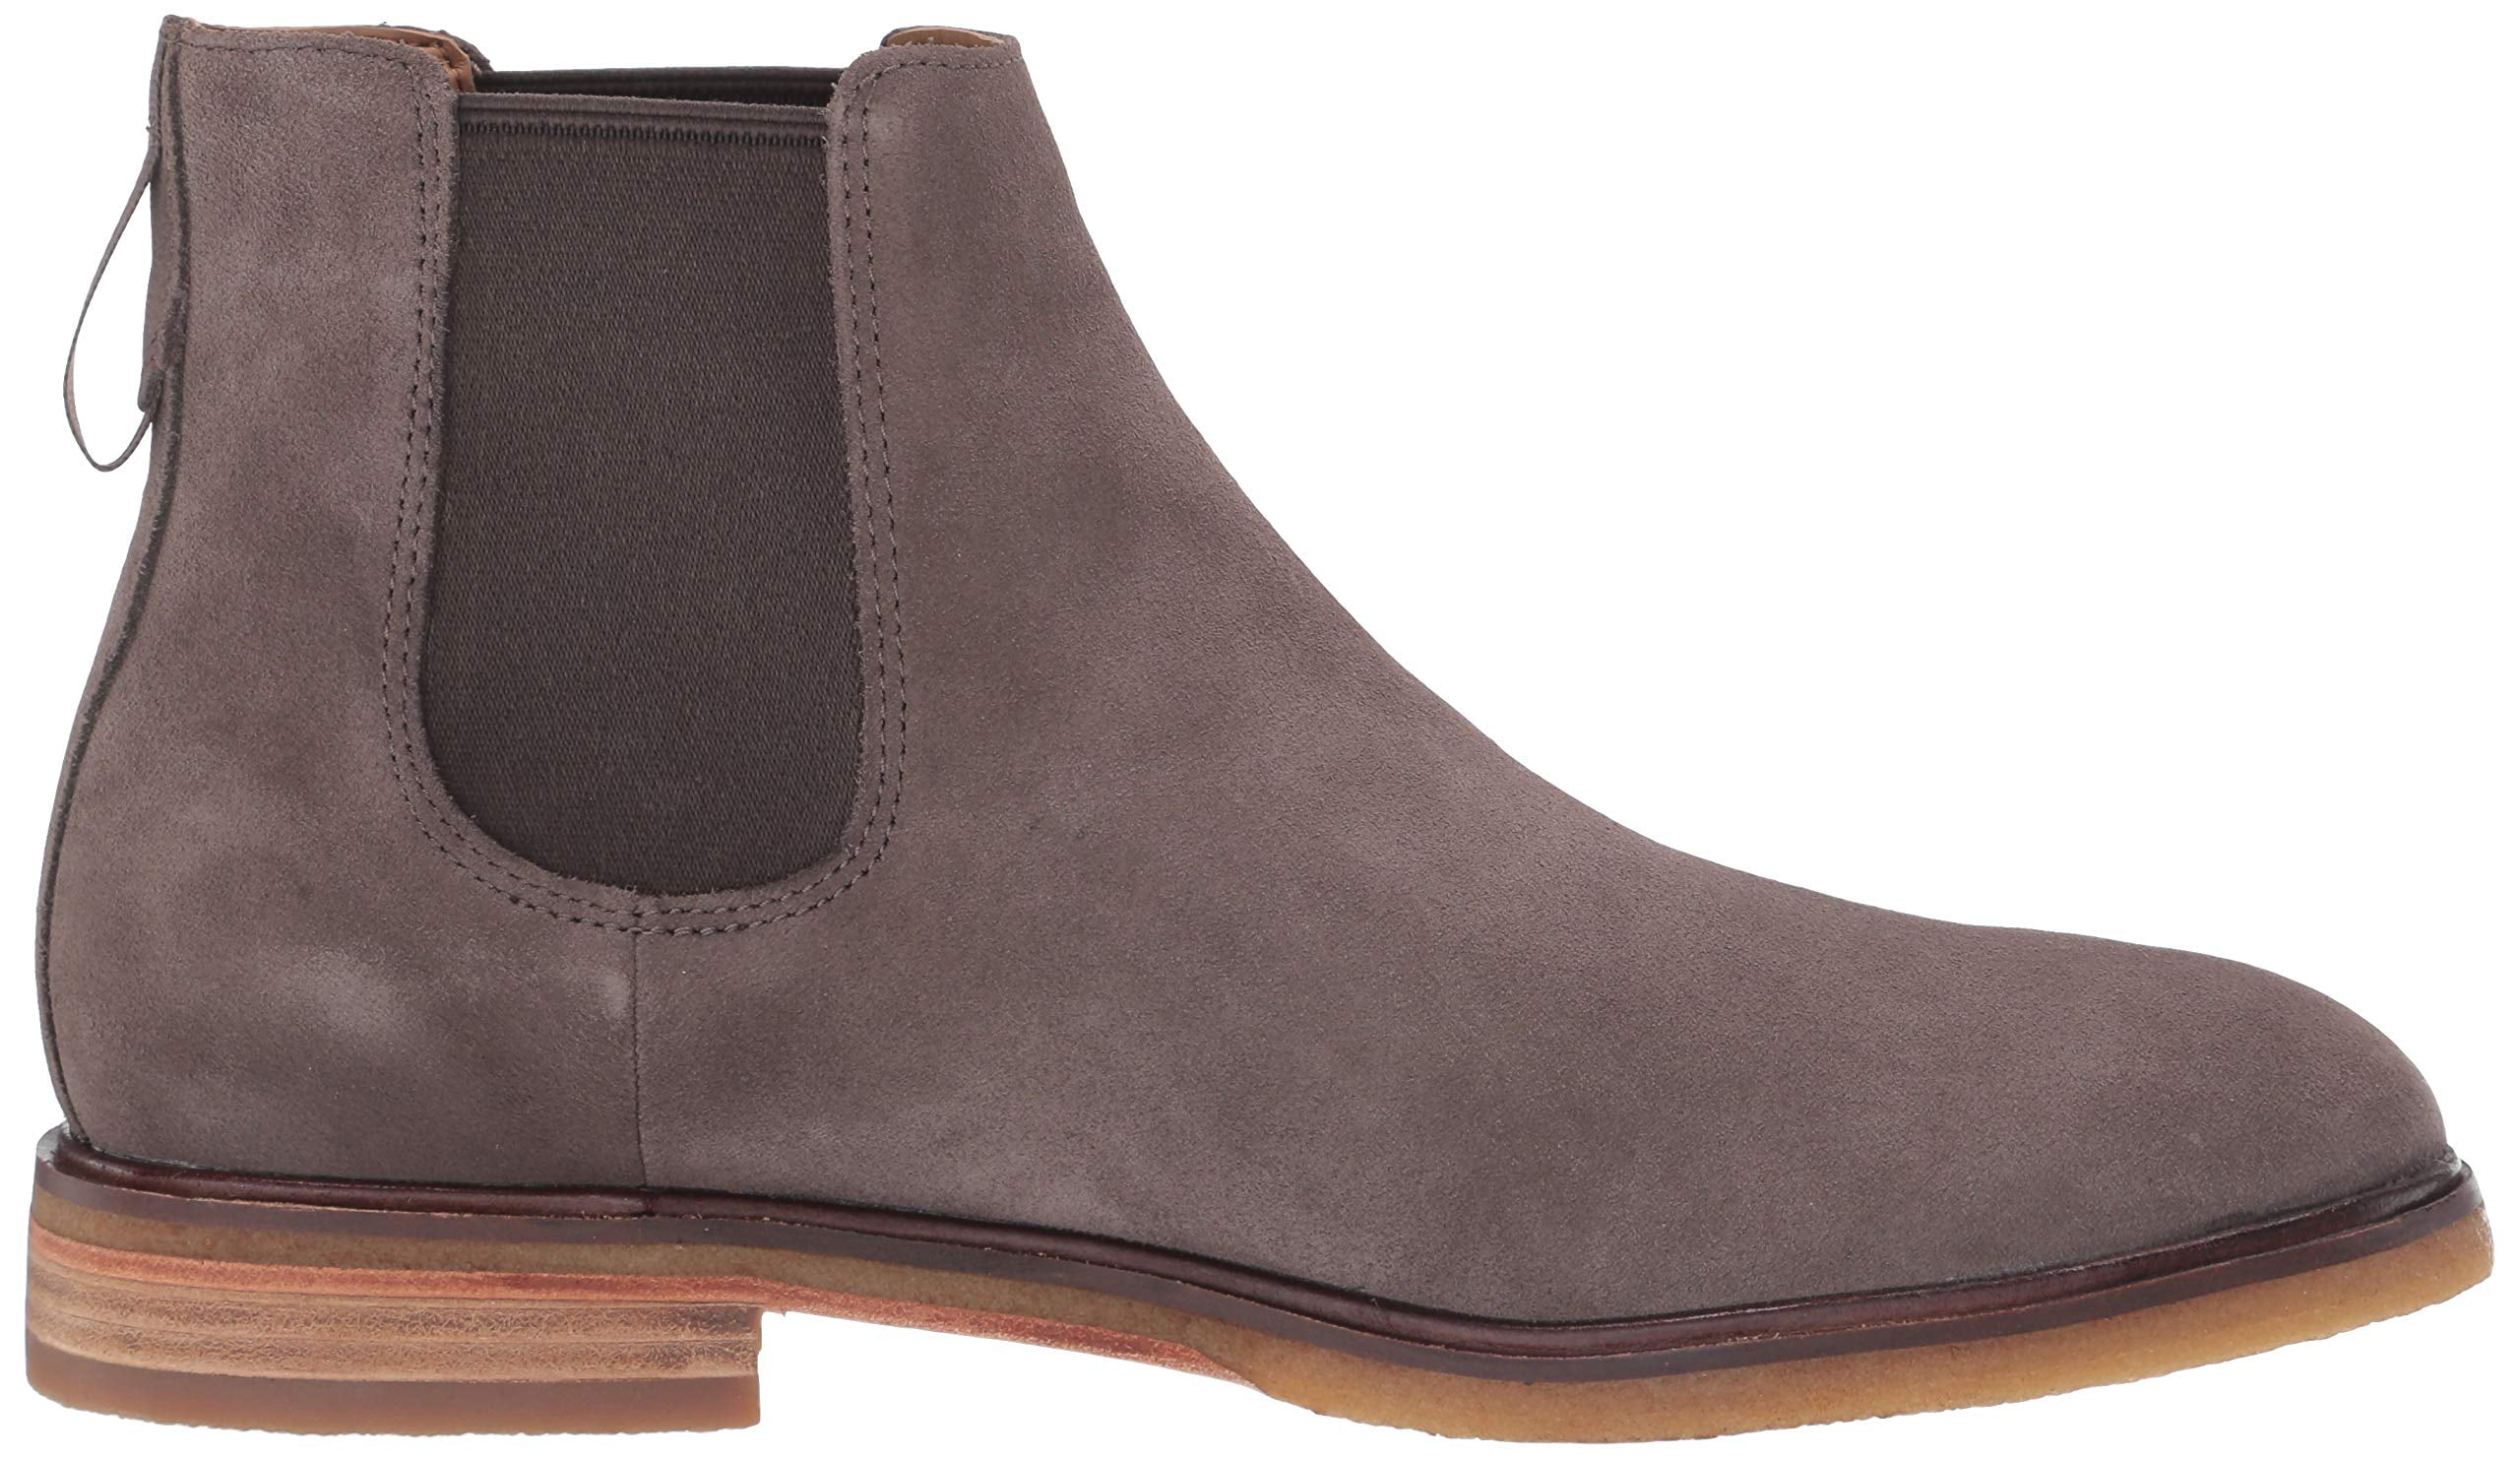 clarkdale chelsea boot